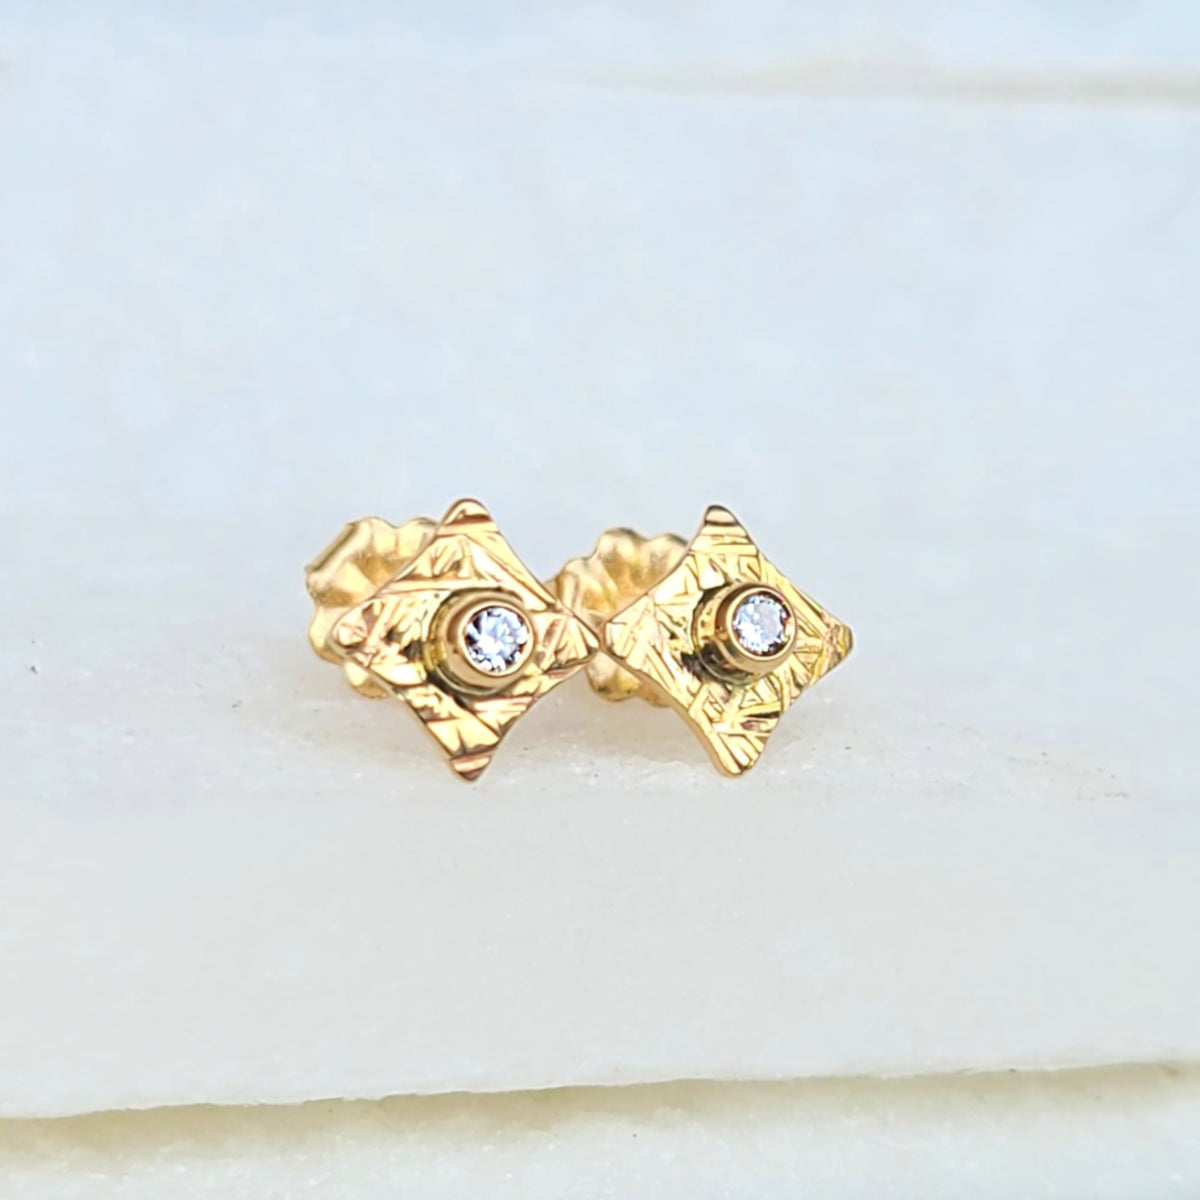 Sincerely Ginger Jewelry 14K Hammered Organic Diamond Stud Earrings